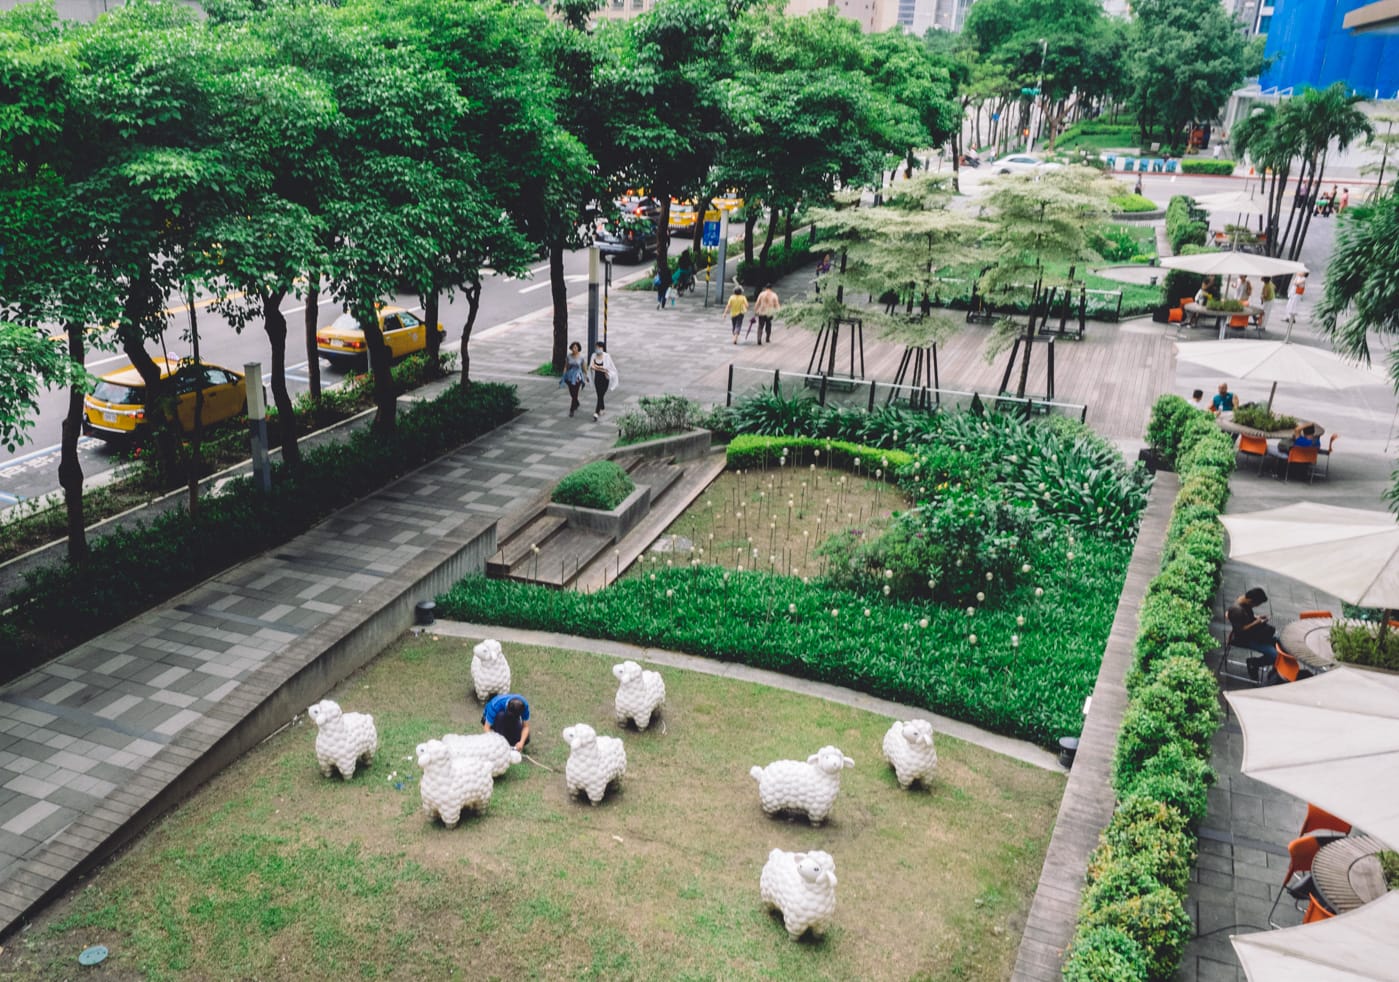 Taiwan - Taipei - Mall area with sheep sculptures